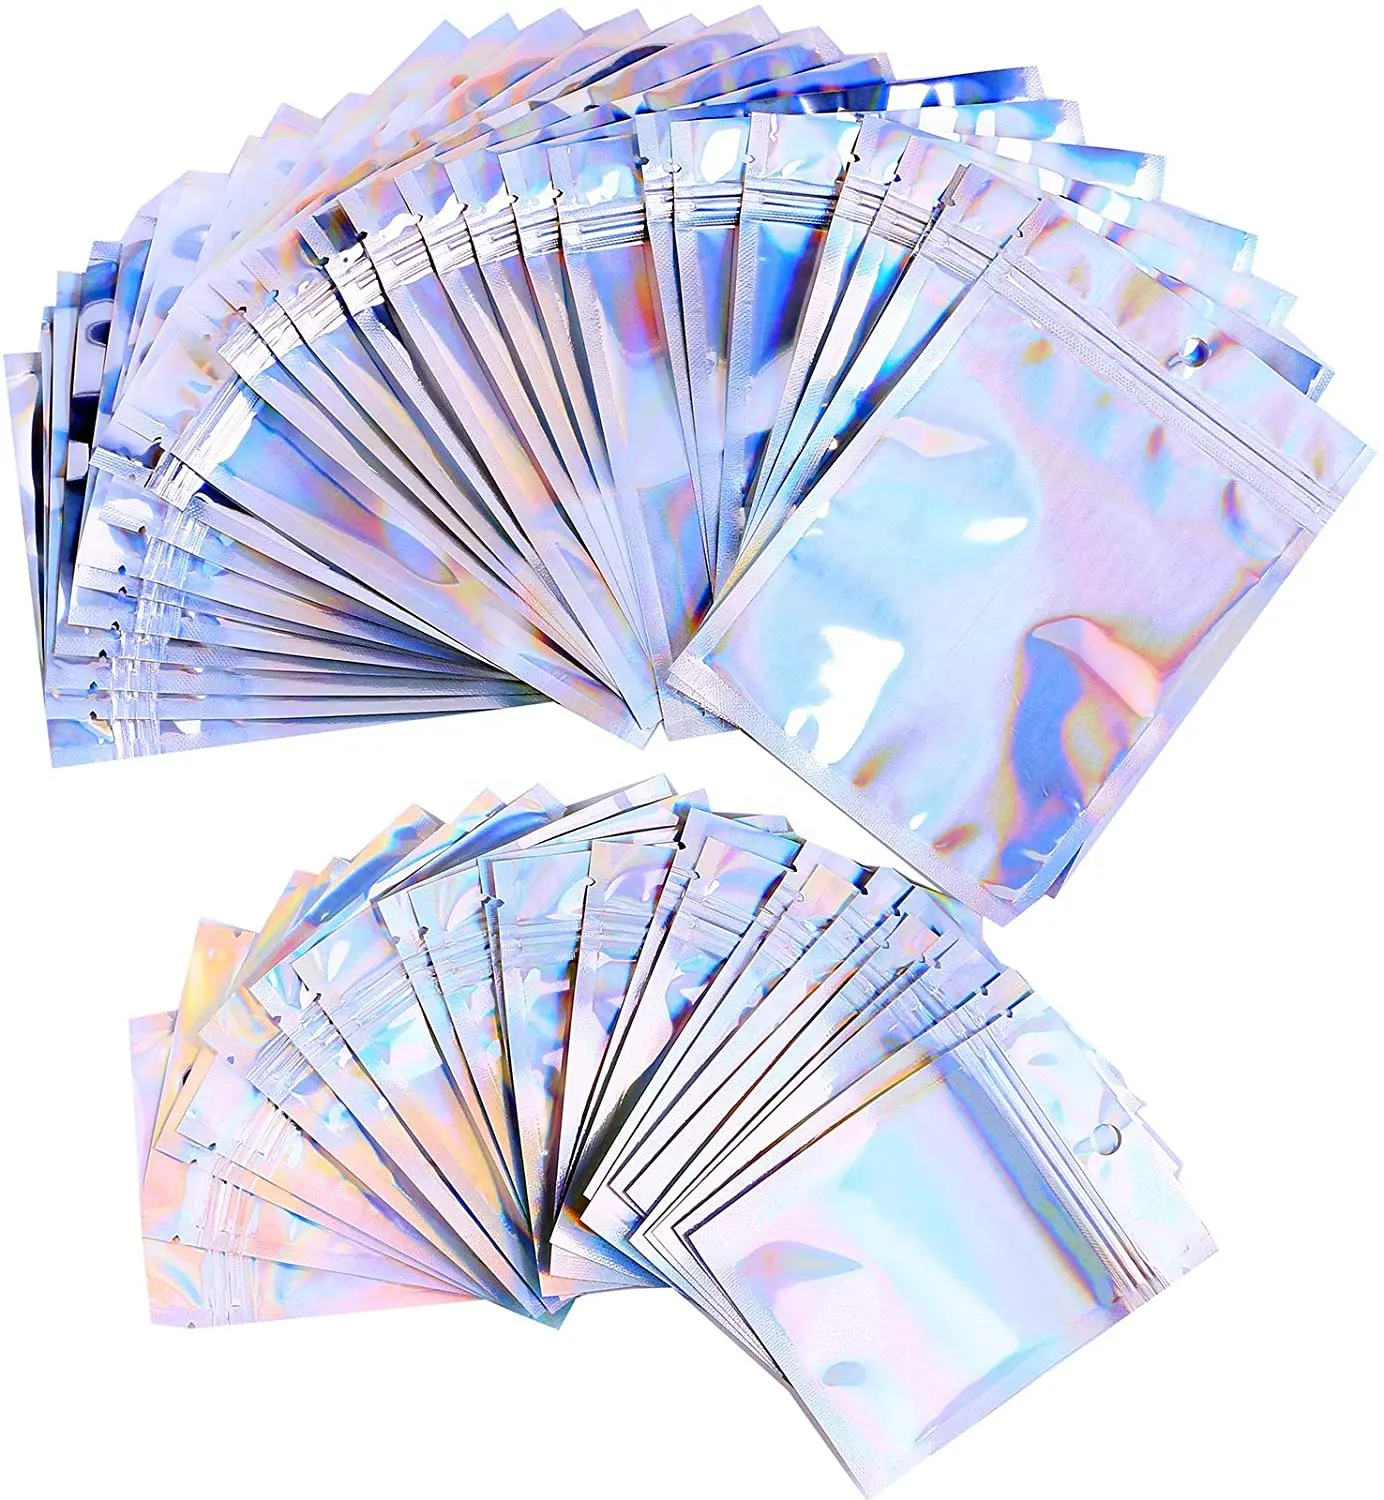 Rainbow Color Holographic Bags Resealable Zip lock Bags Mylar Bags for Food Storage, Coffee Beans, Candy & Jewelry Packaging